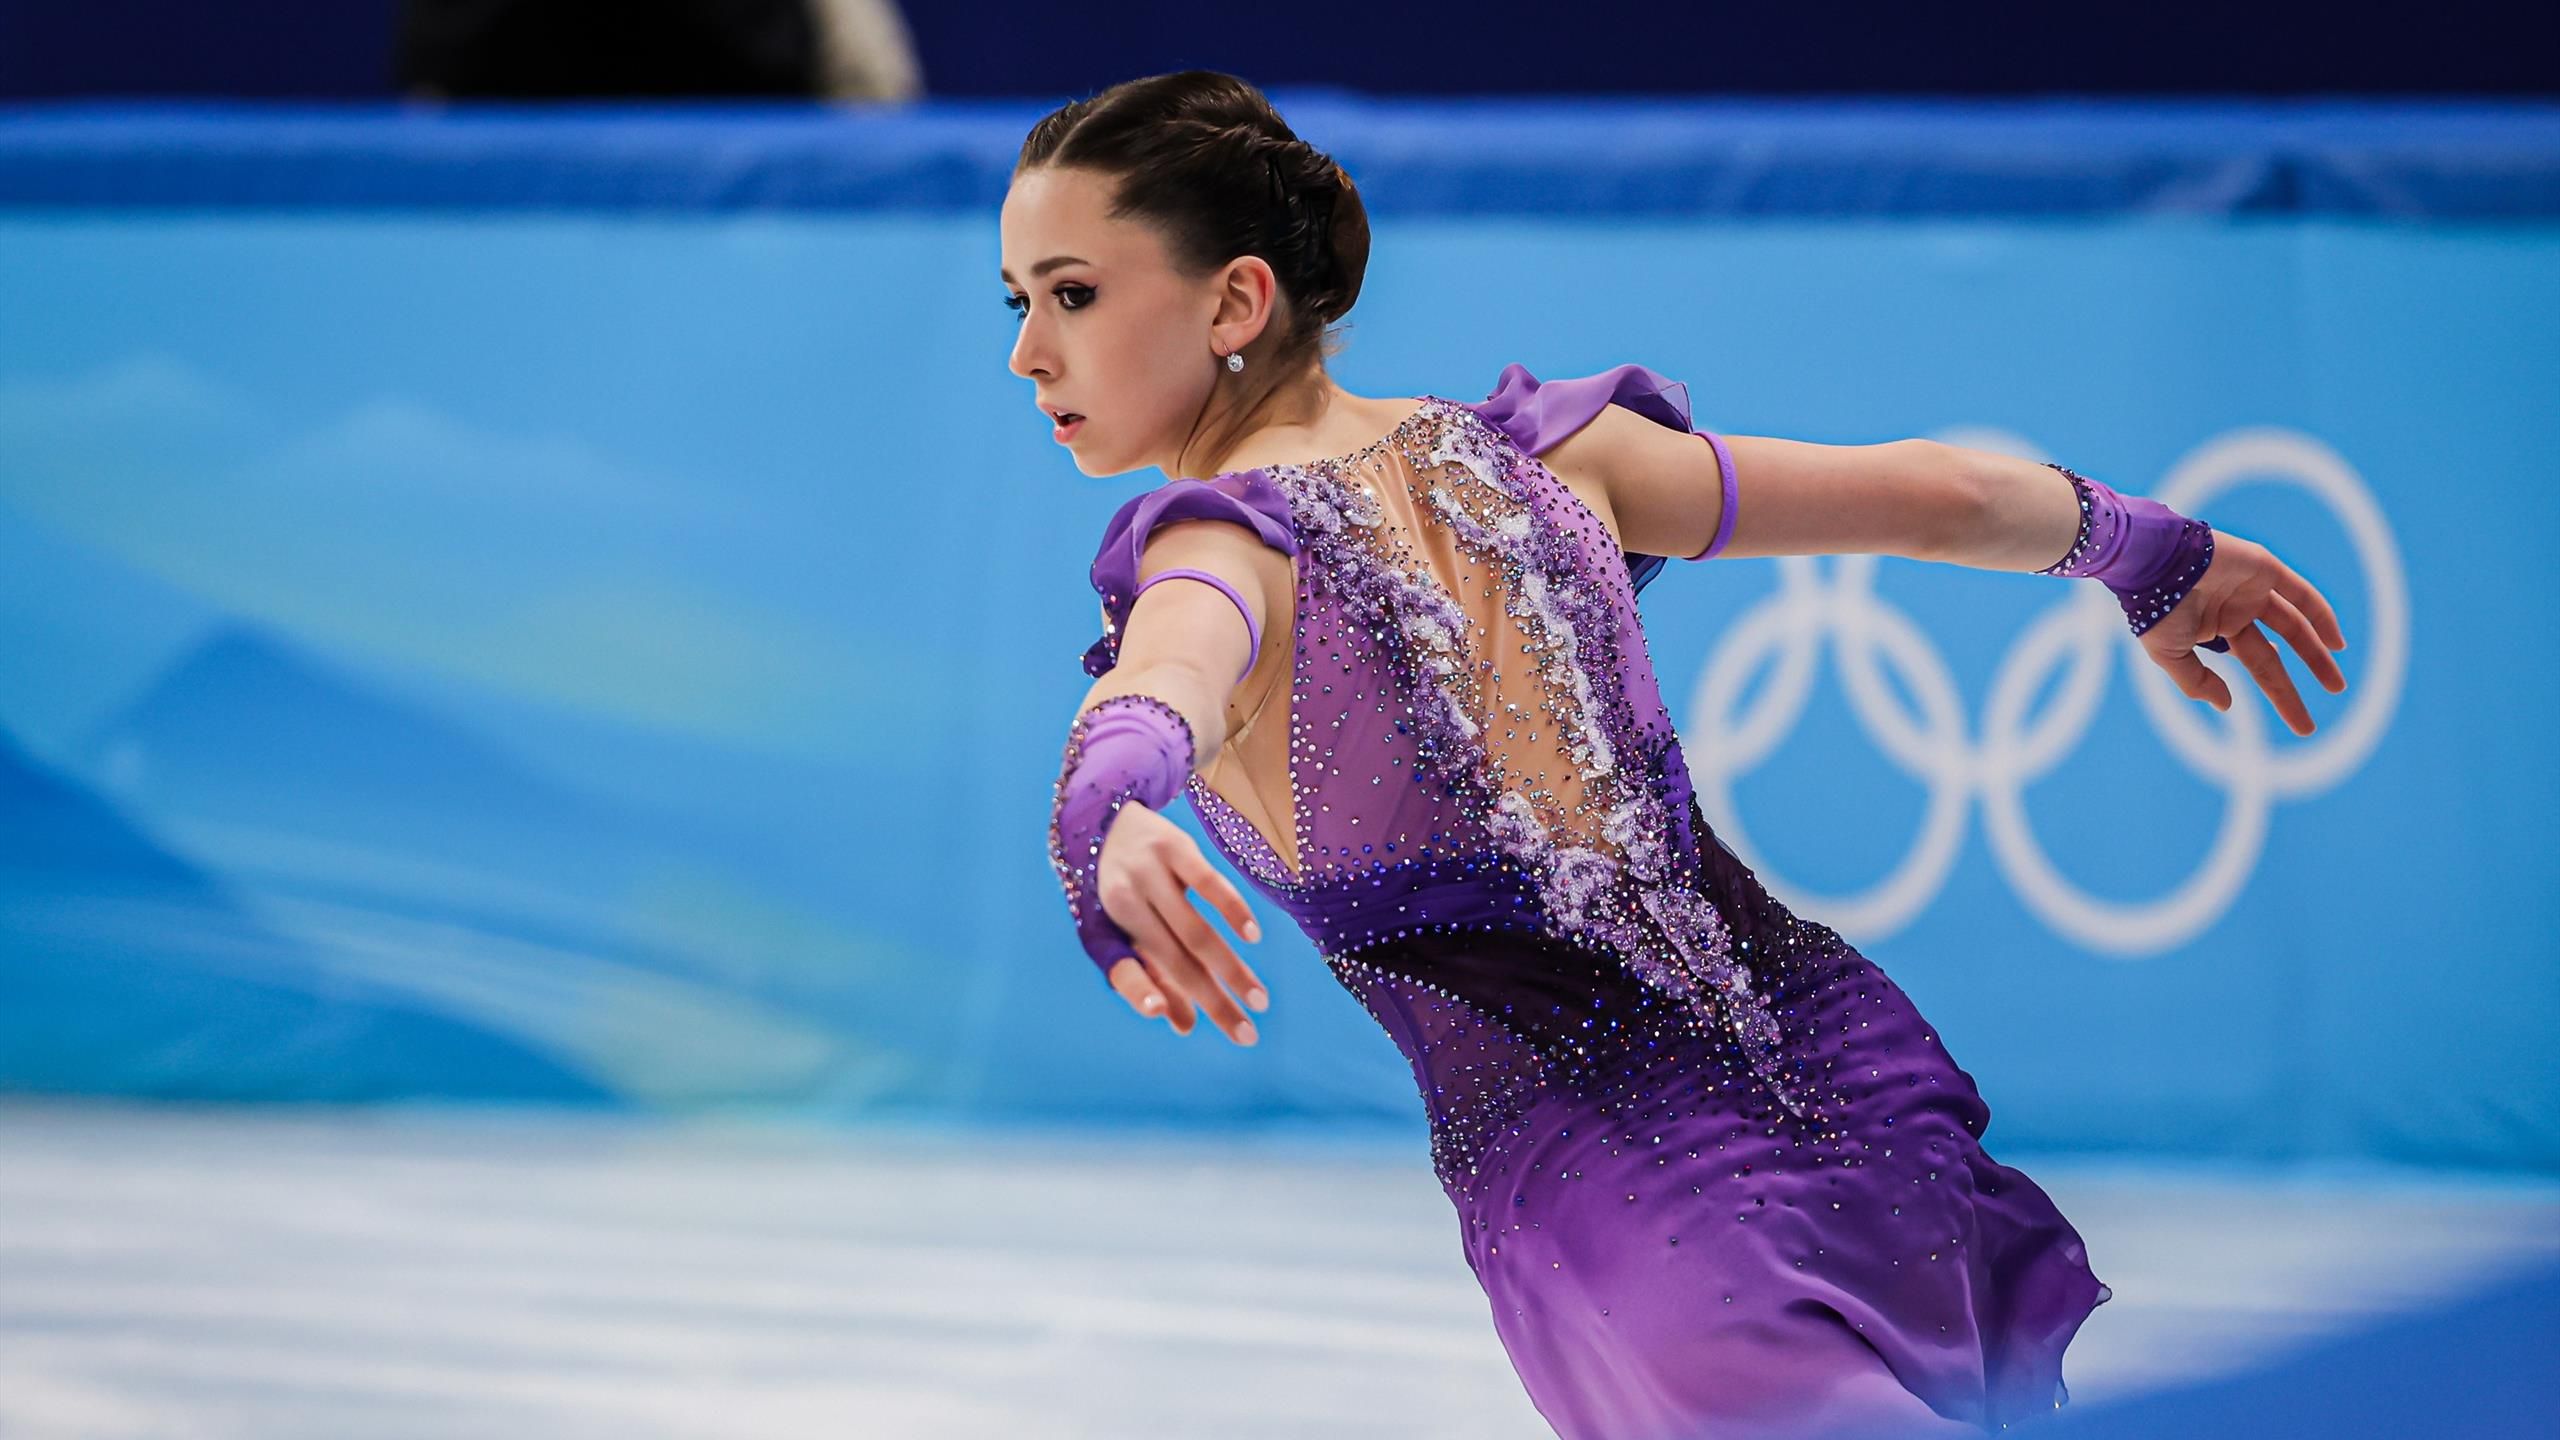 When is Kamila Valieva skating again? Figure skating schedule at the Beijing 2022 Winter Olympics